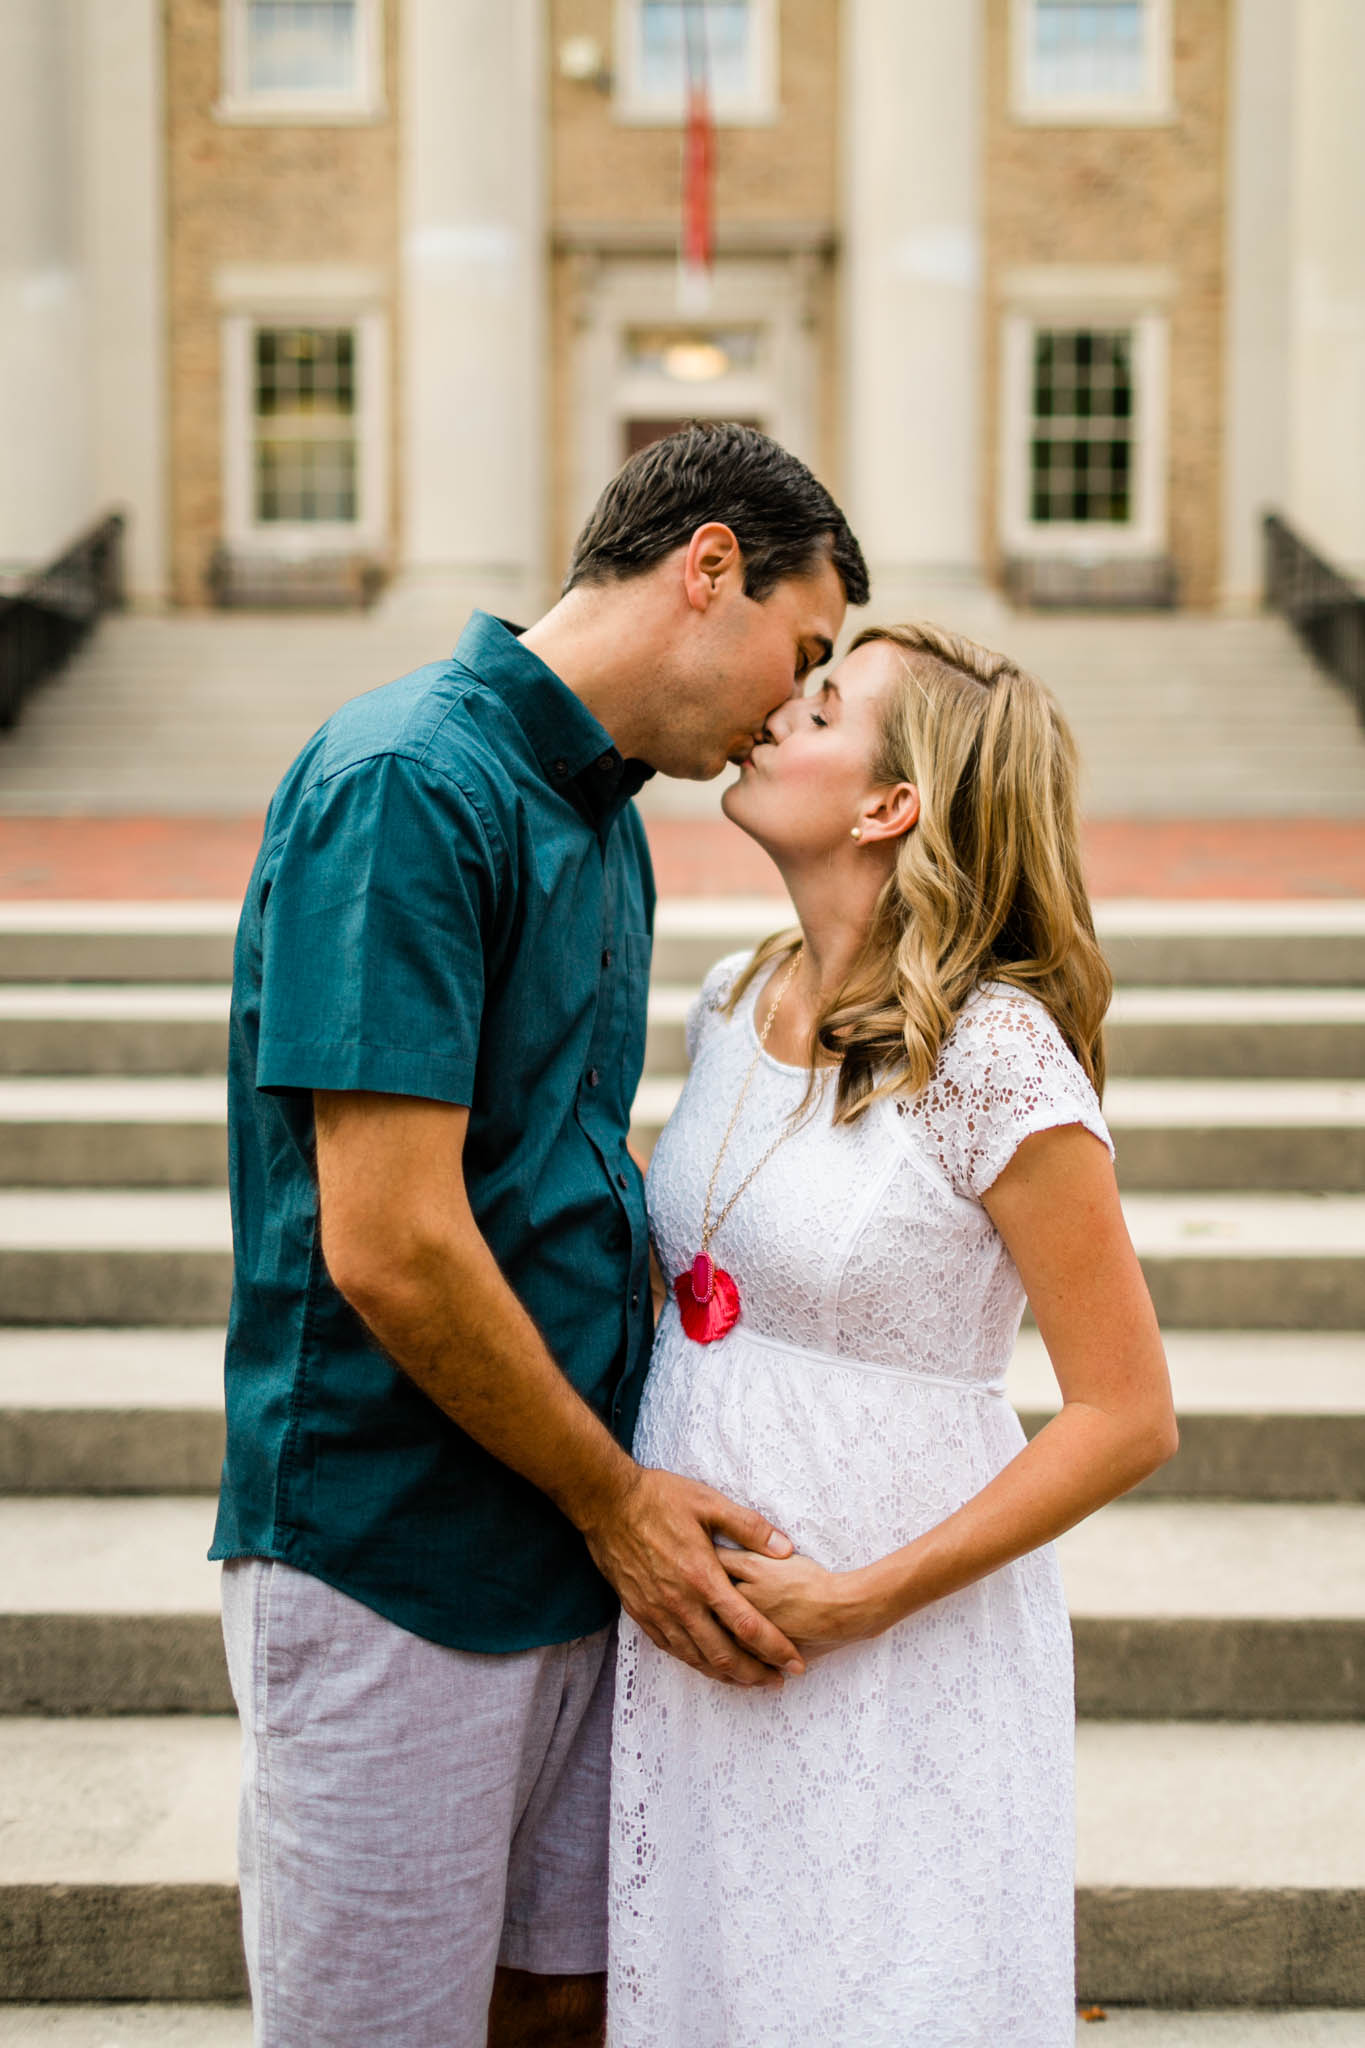 Maternity Photography at UNC Campus | By G. Lin Photography | South Building | Couple kissing